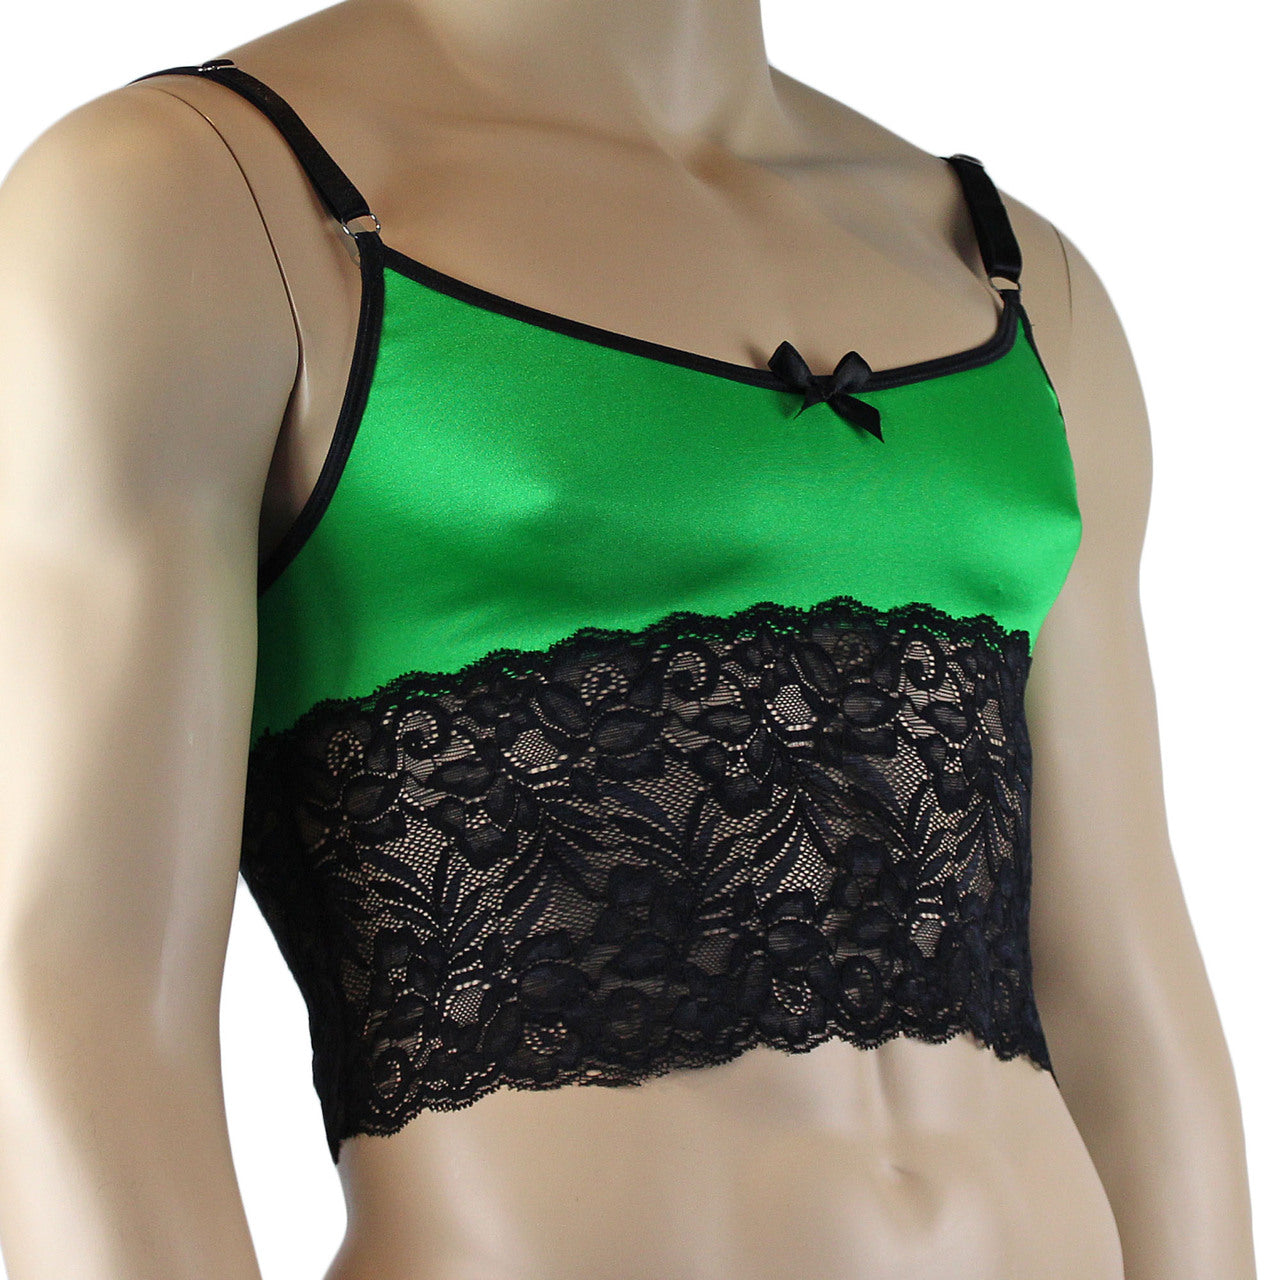 Mens Risque Camisole Bra Top with Wide Lace Trim Green and Black Lace